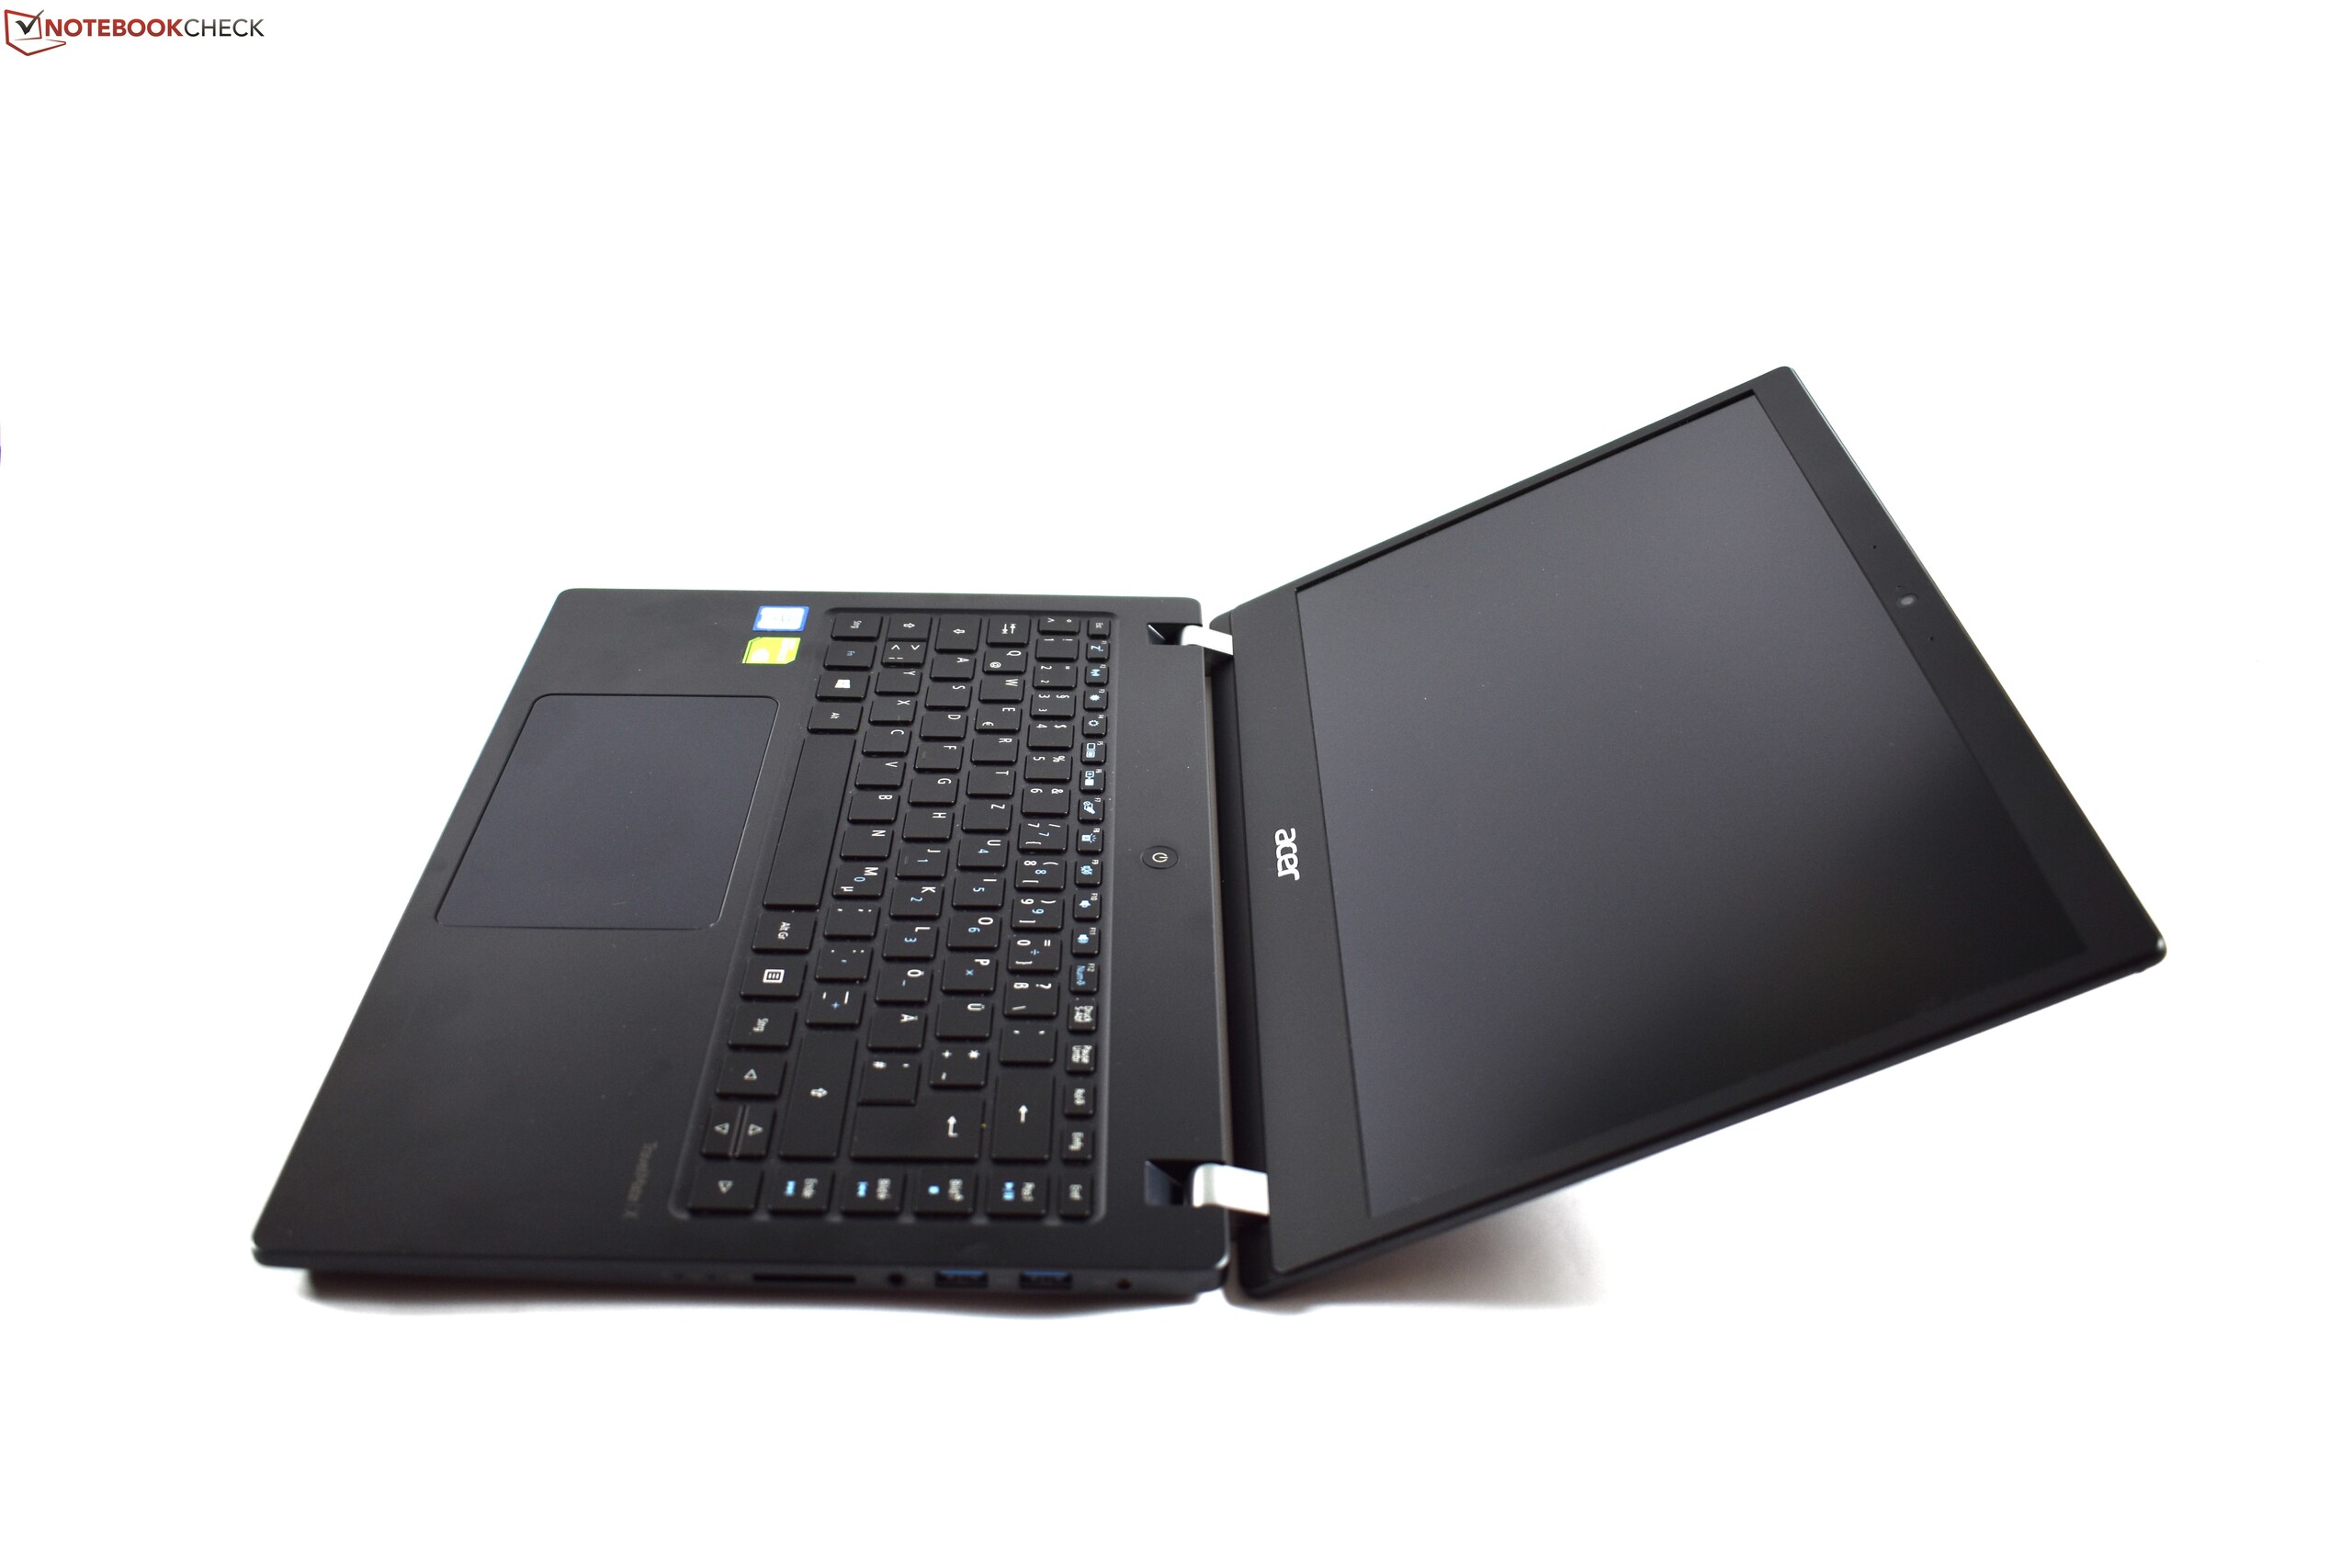 Acer TravelMate X3410 (i7, MX130, FHD) Laptop Review 